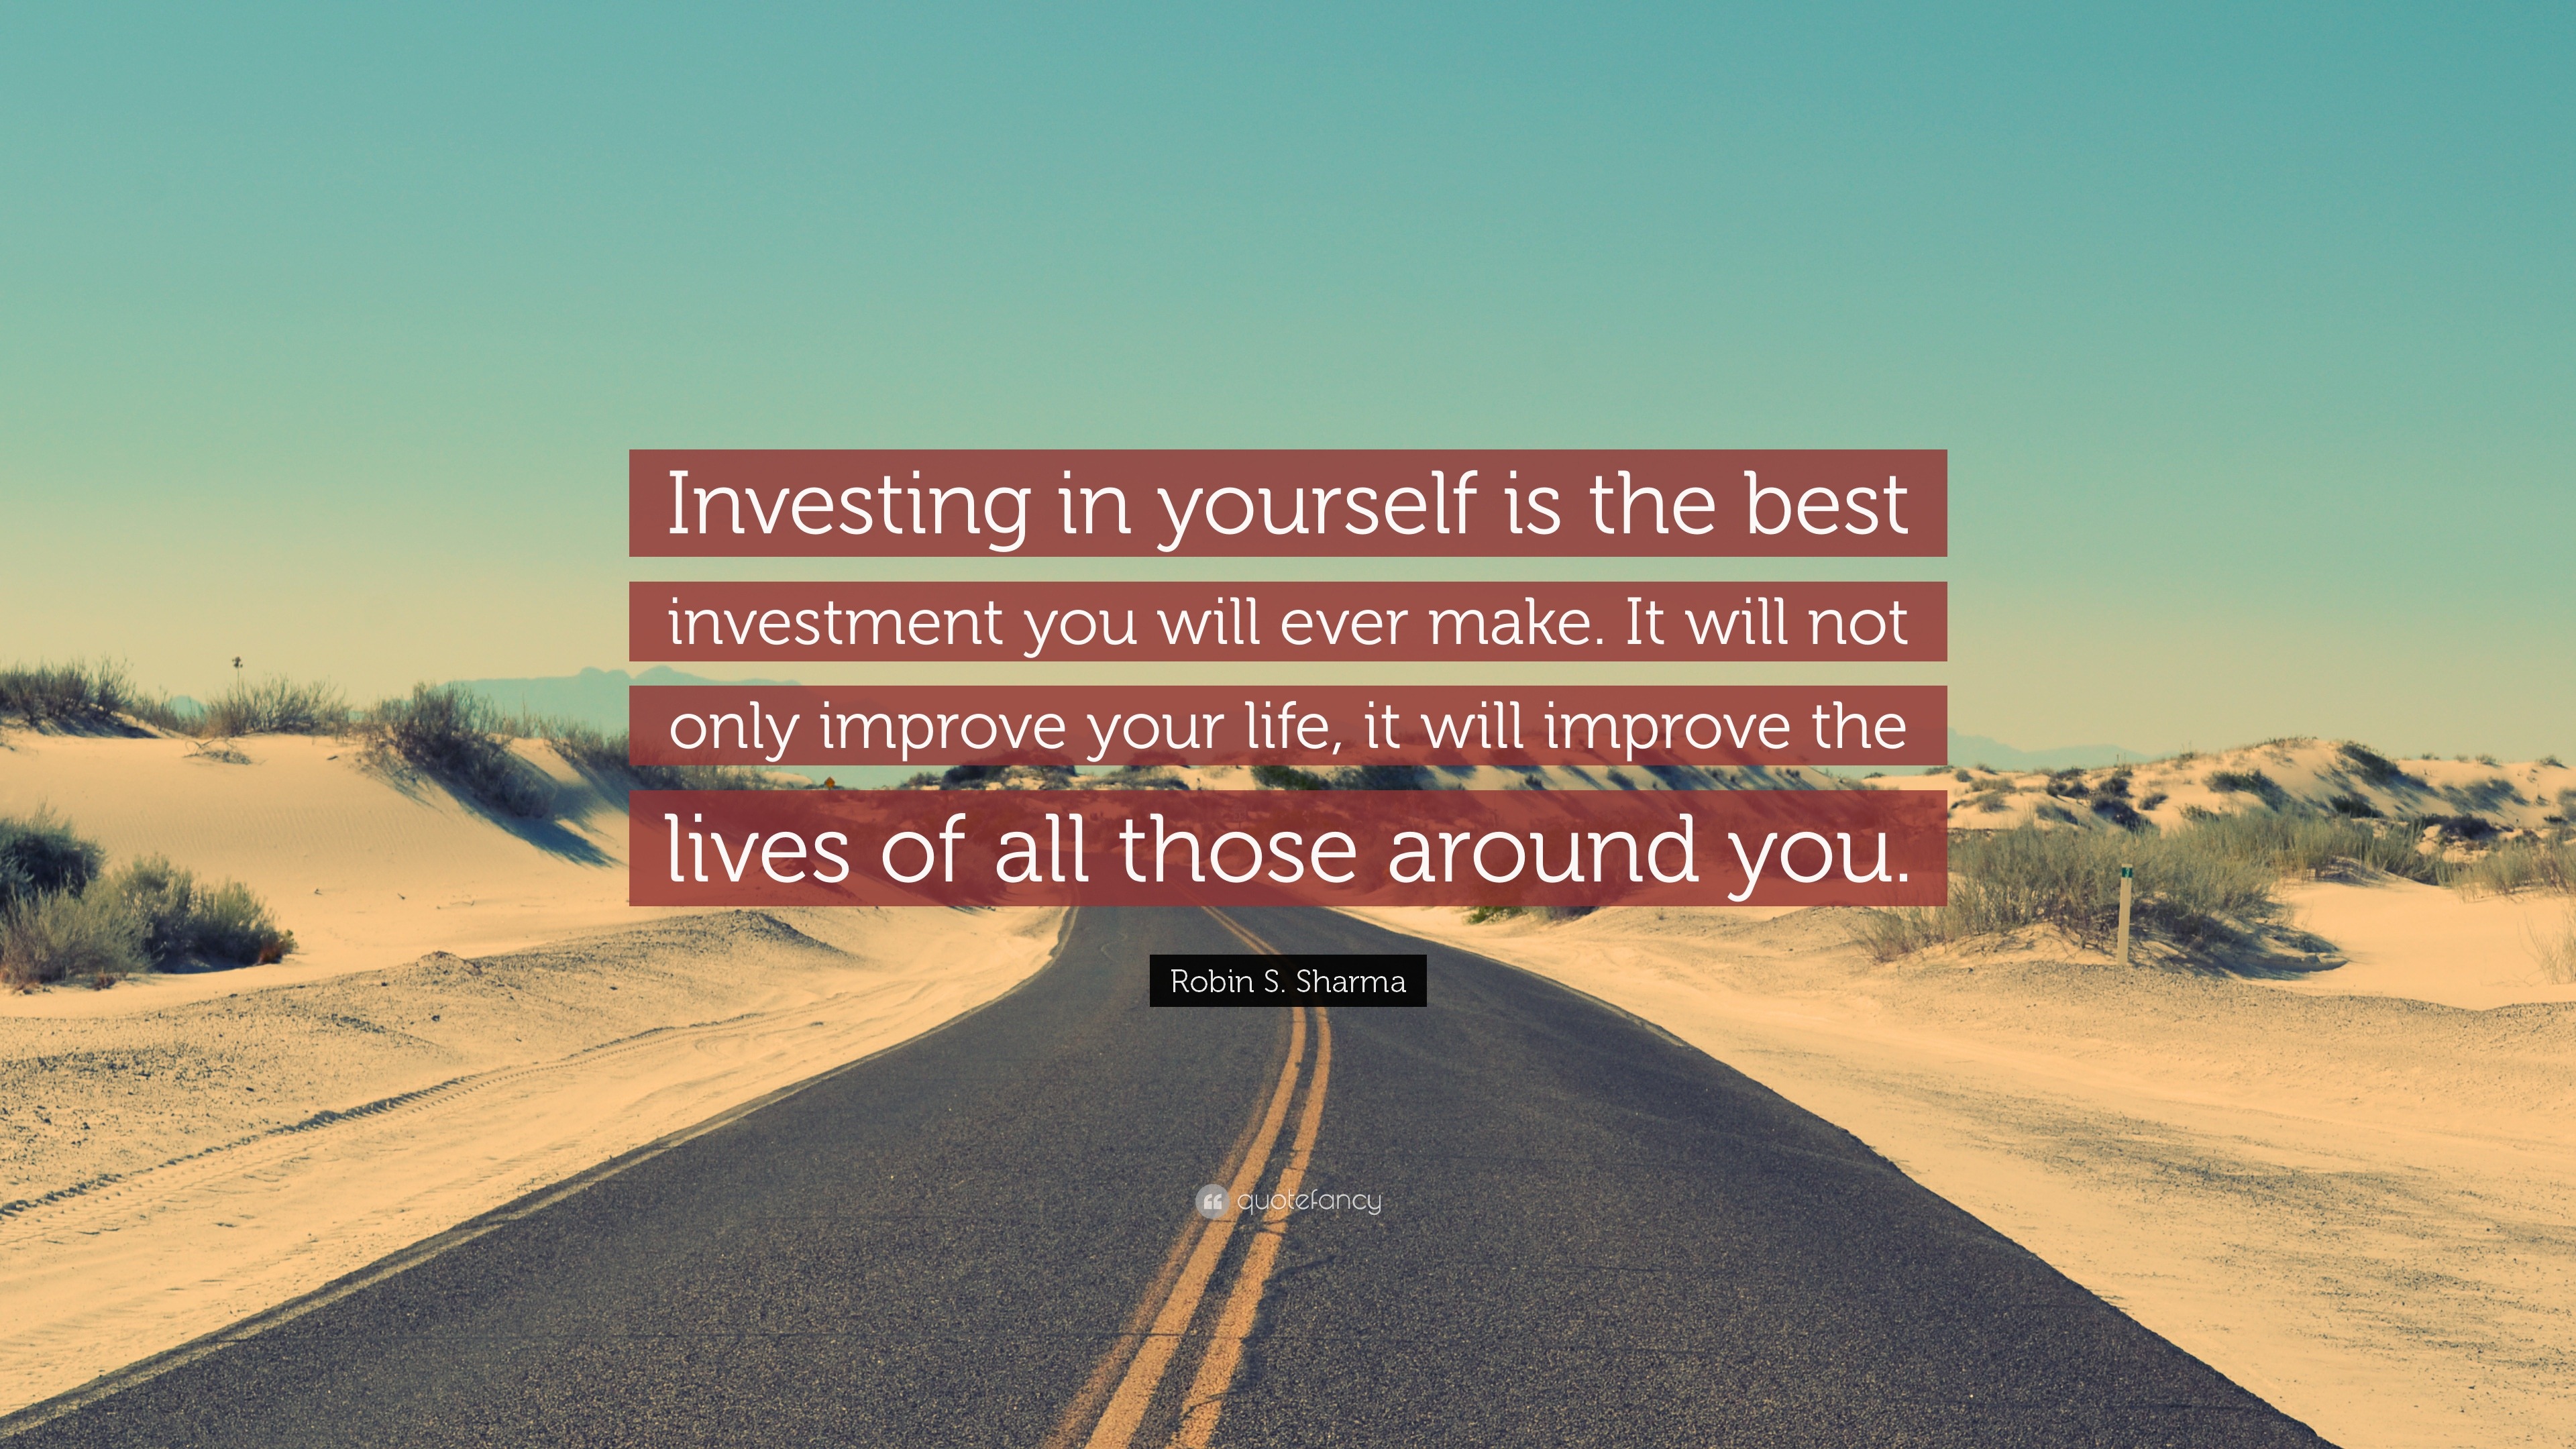 Robin S. Sharma Quote: "Investing in yourself is the best ...